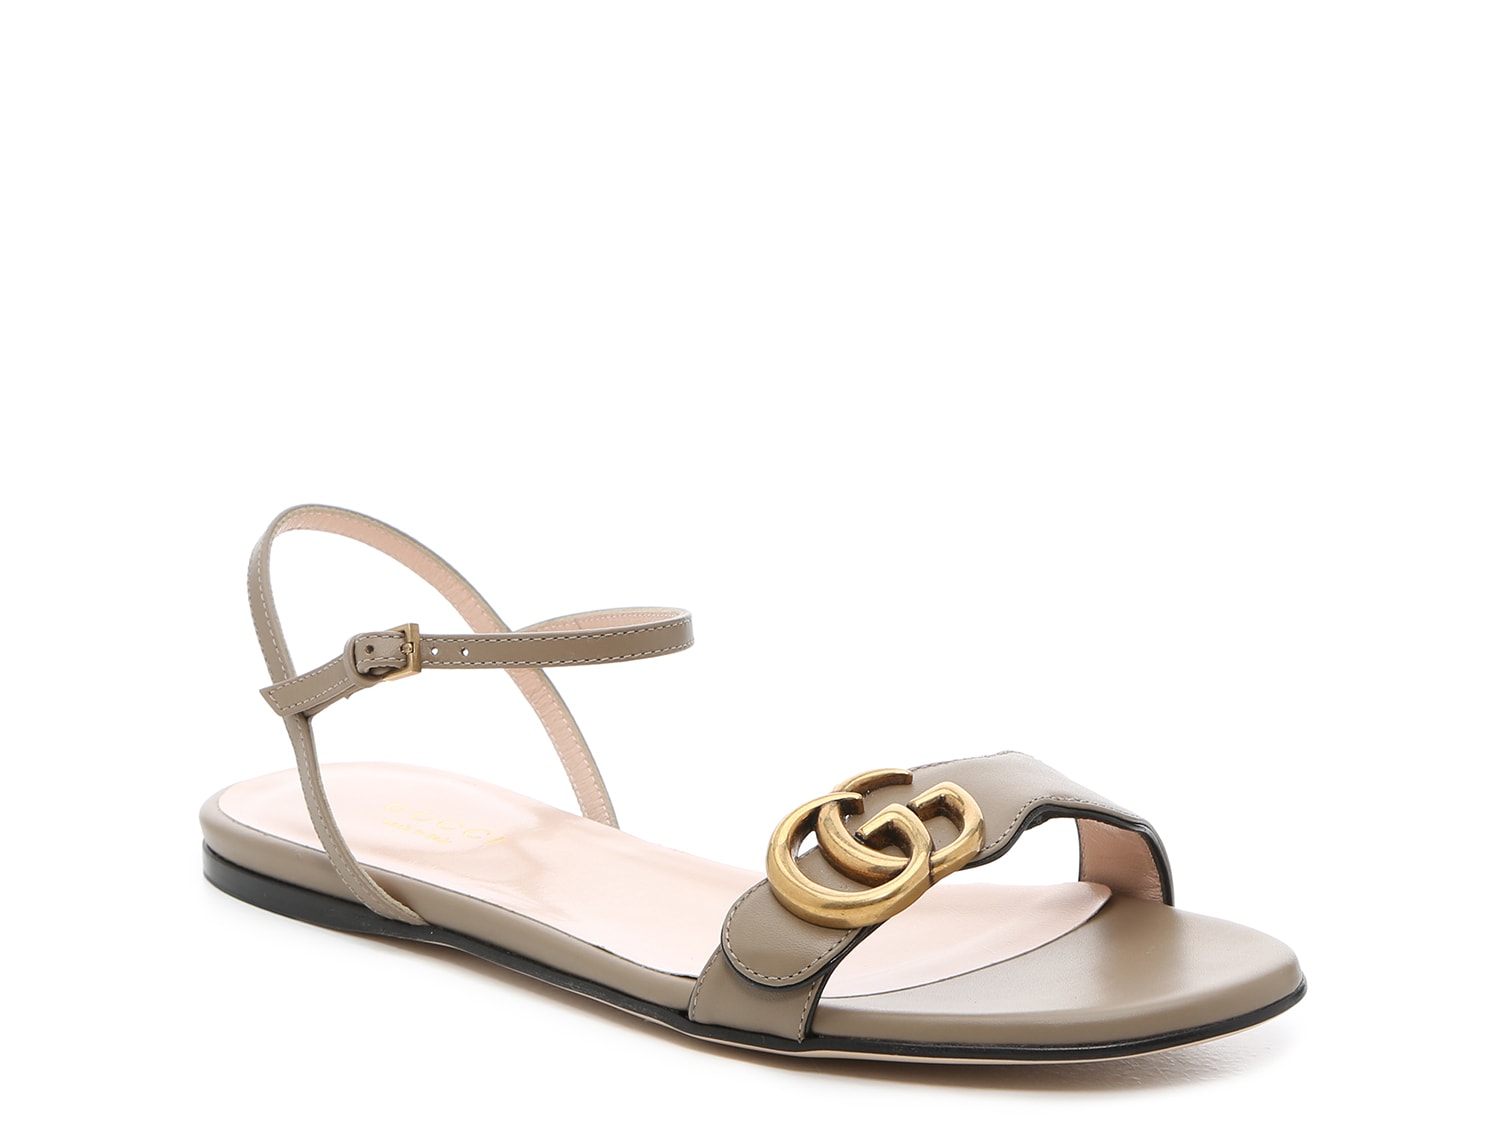 Gucci Marmont Sandal - Free Shipping